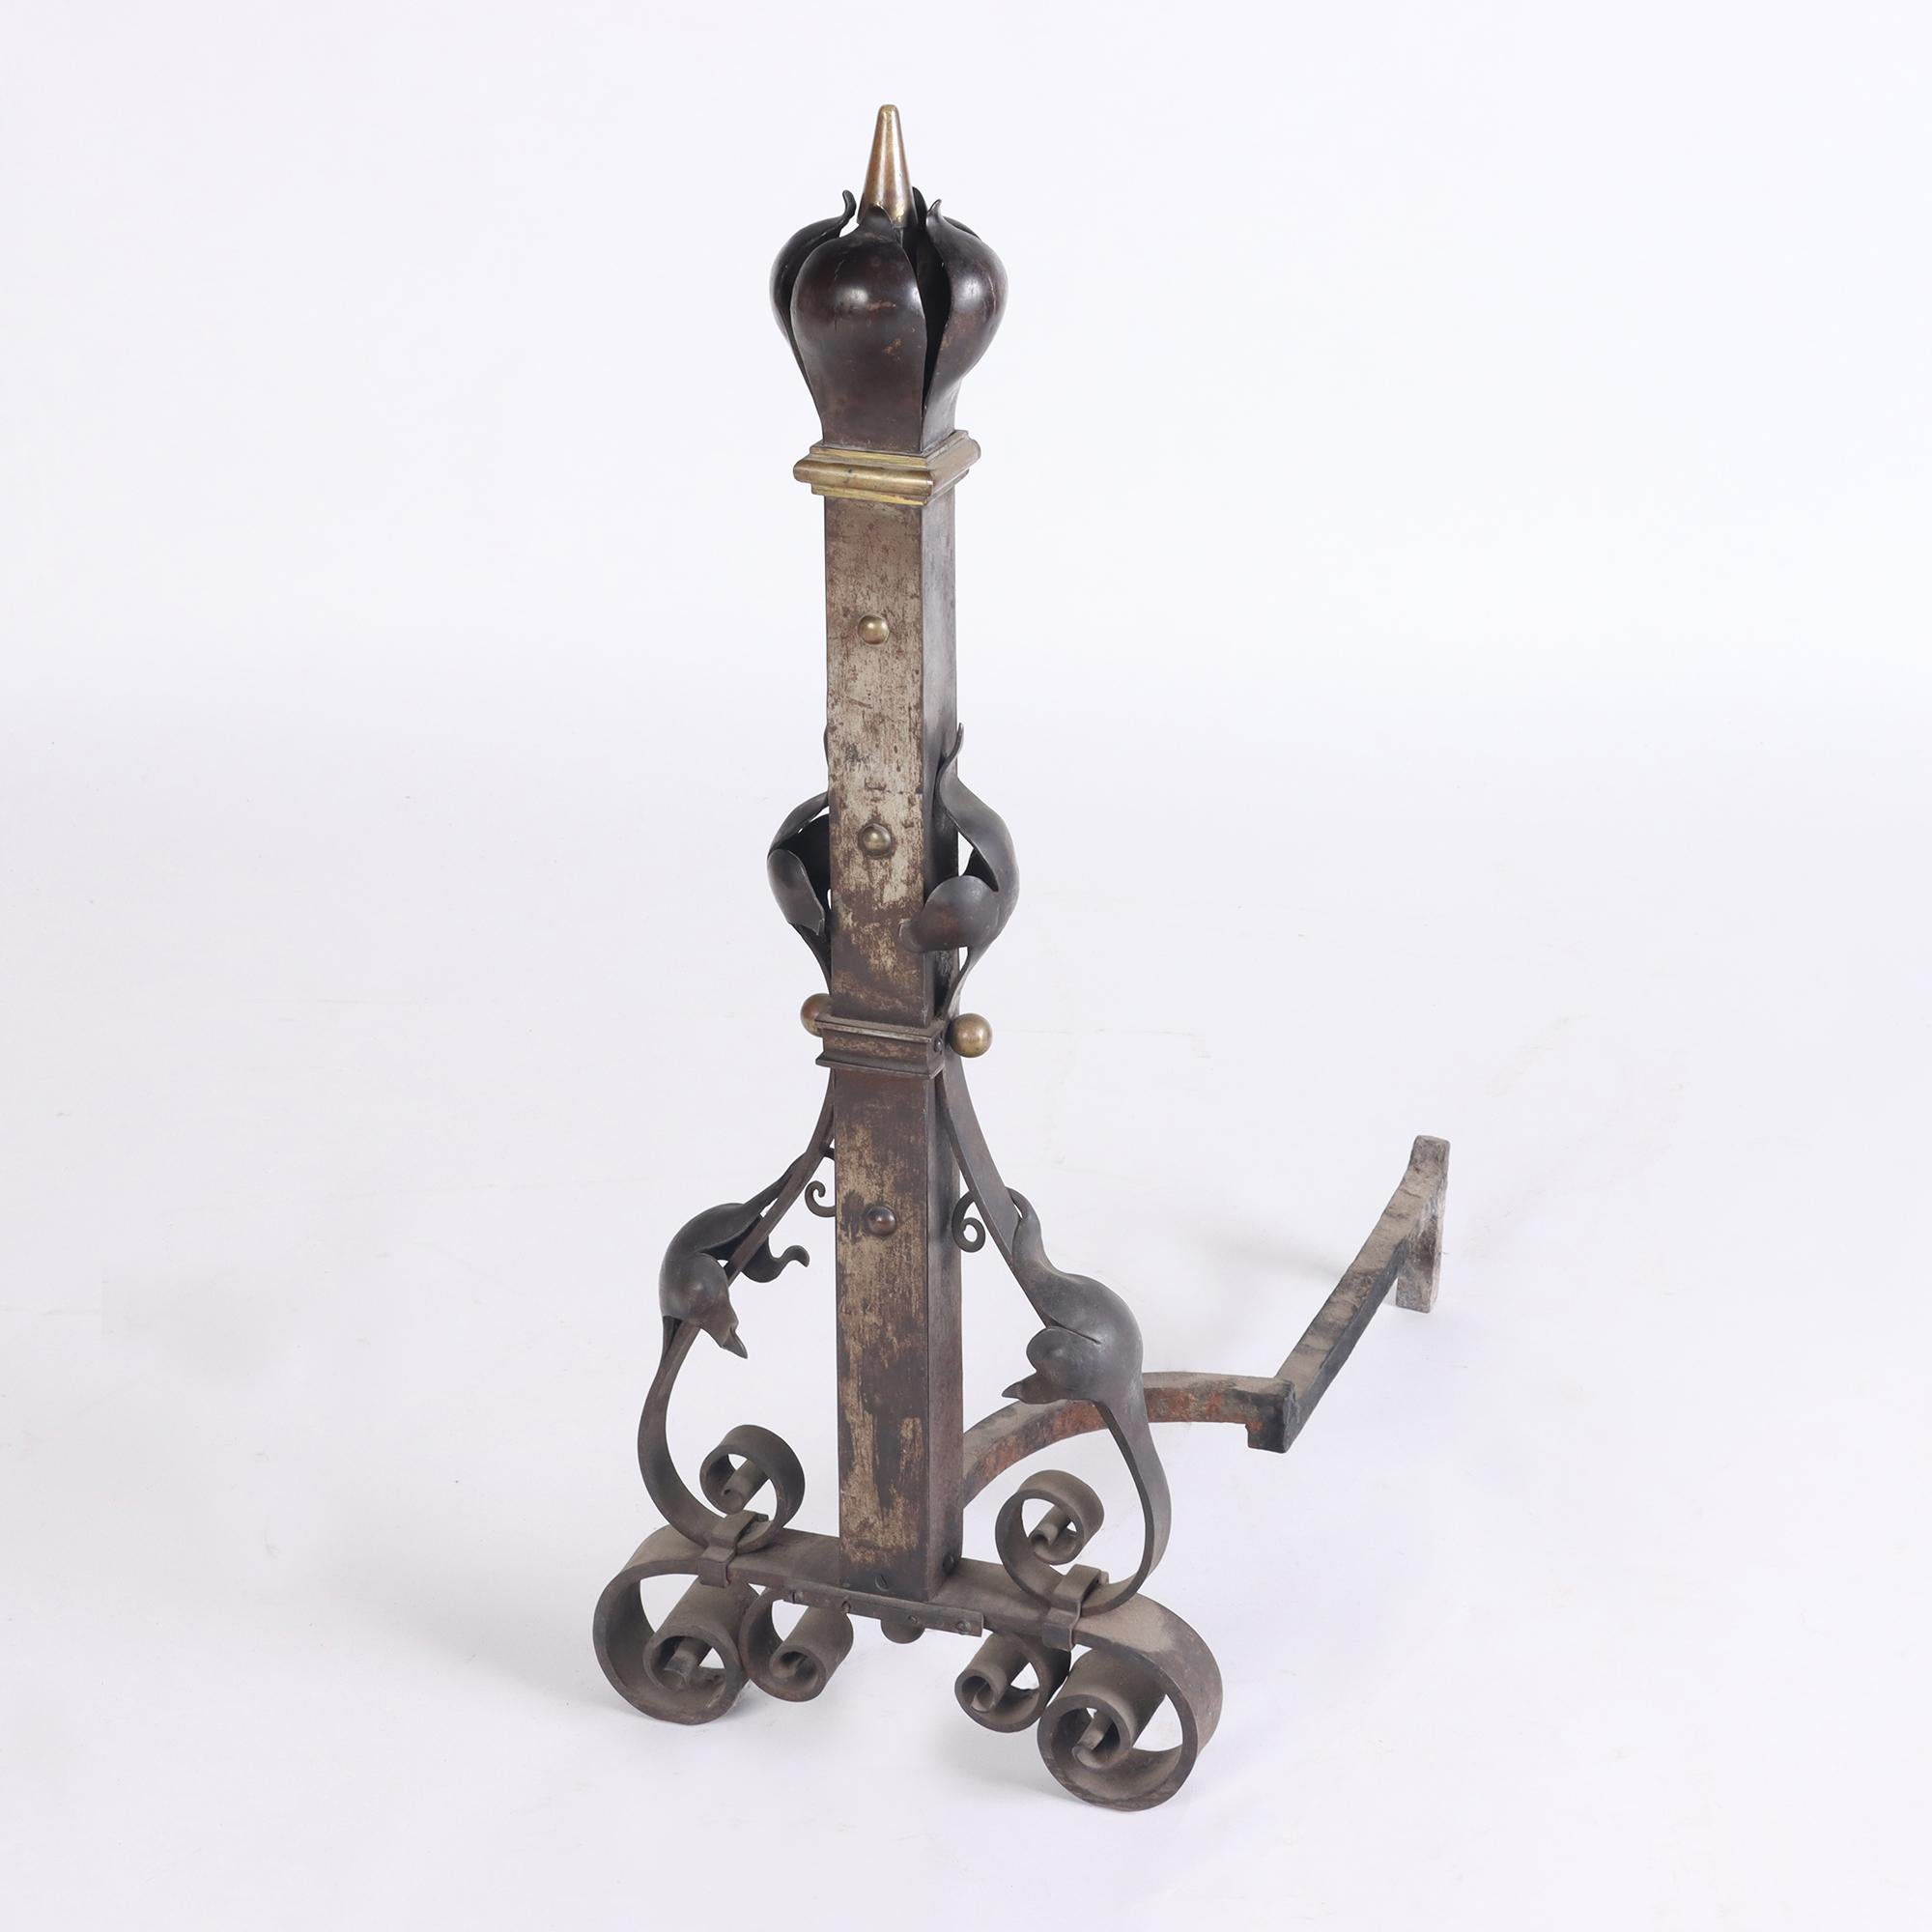 Substantial and Monumental Pair of Nineteenth Century French Wrought Iron and For Sale 1